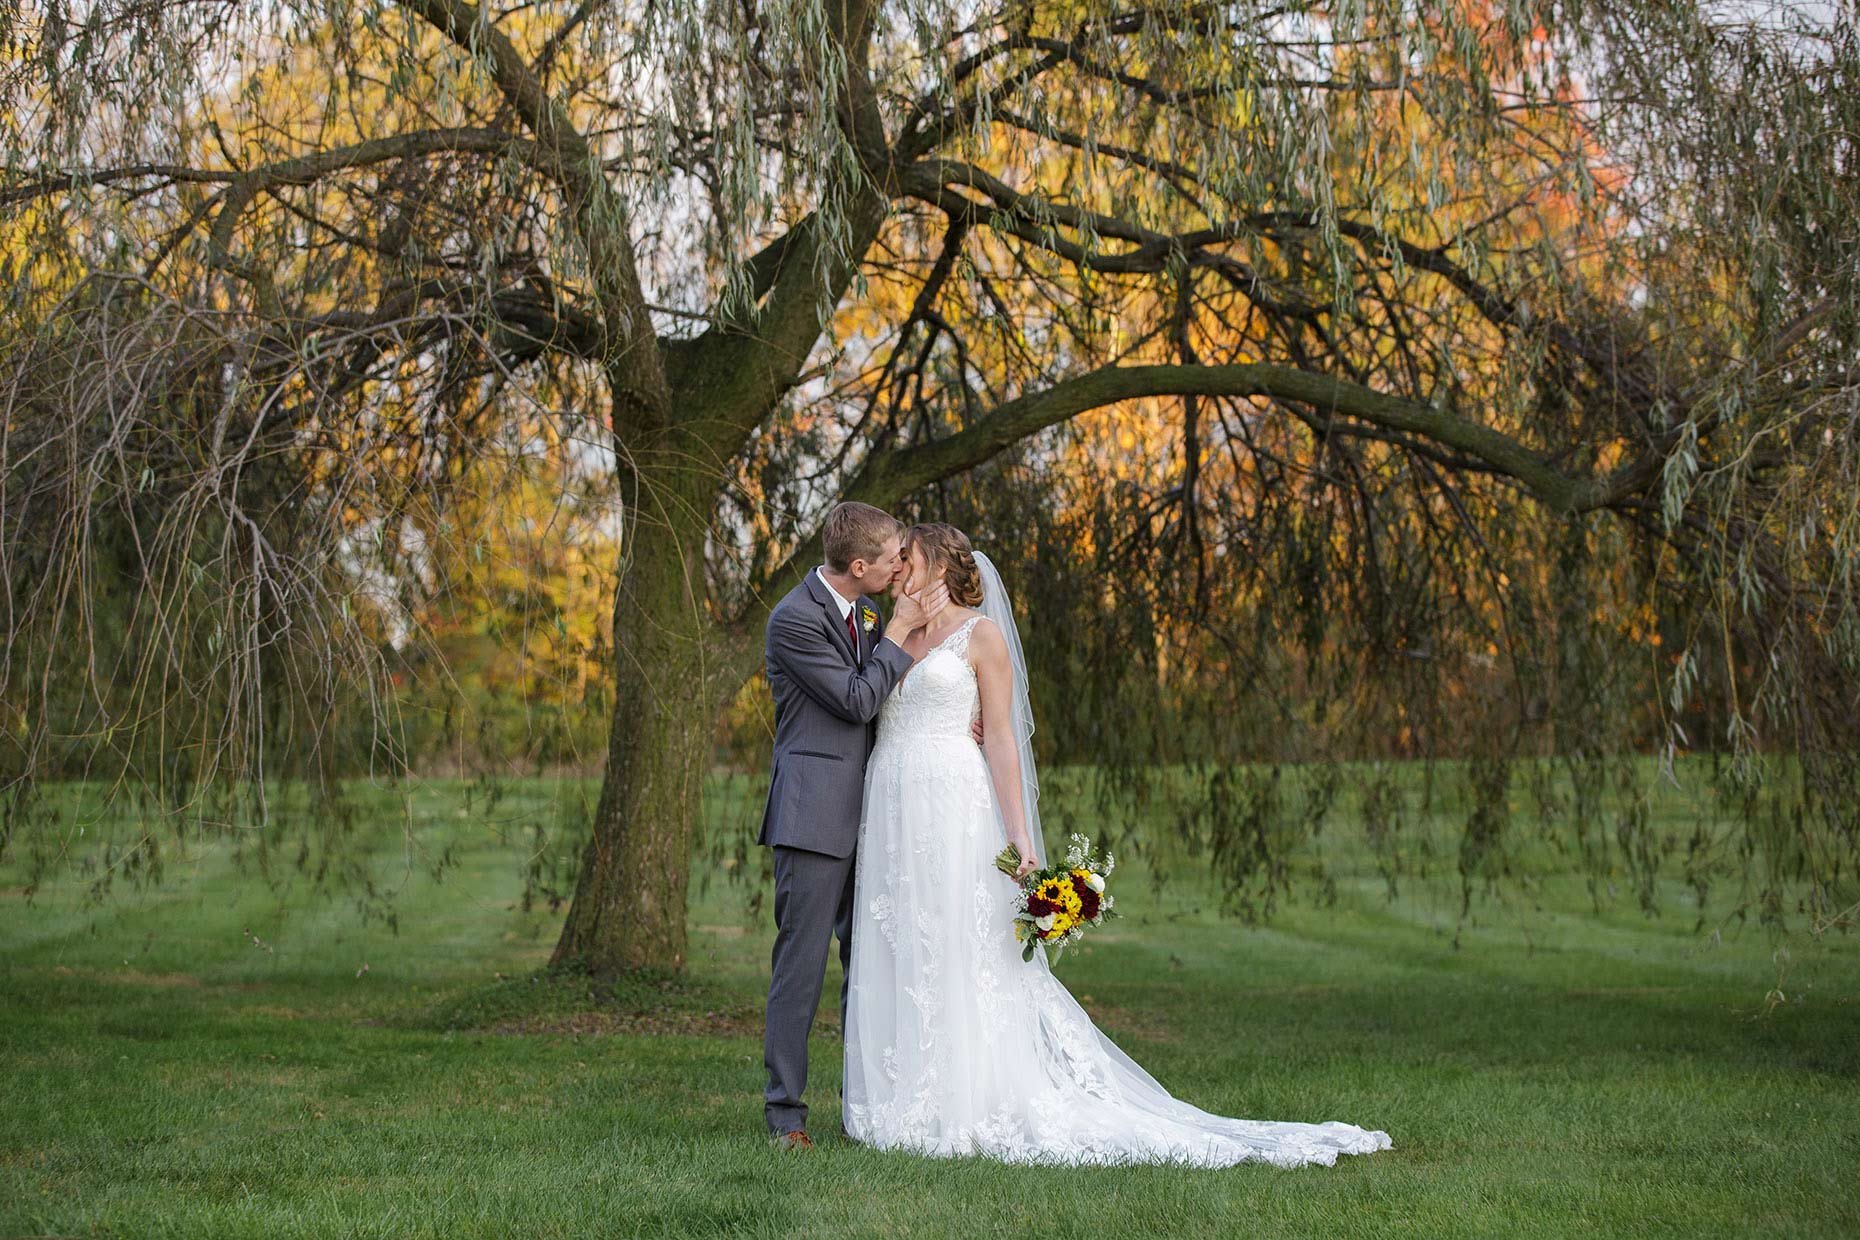 Bride &amp; Groom kissing under a weeping willow tree